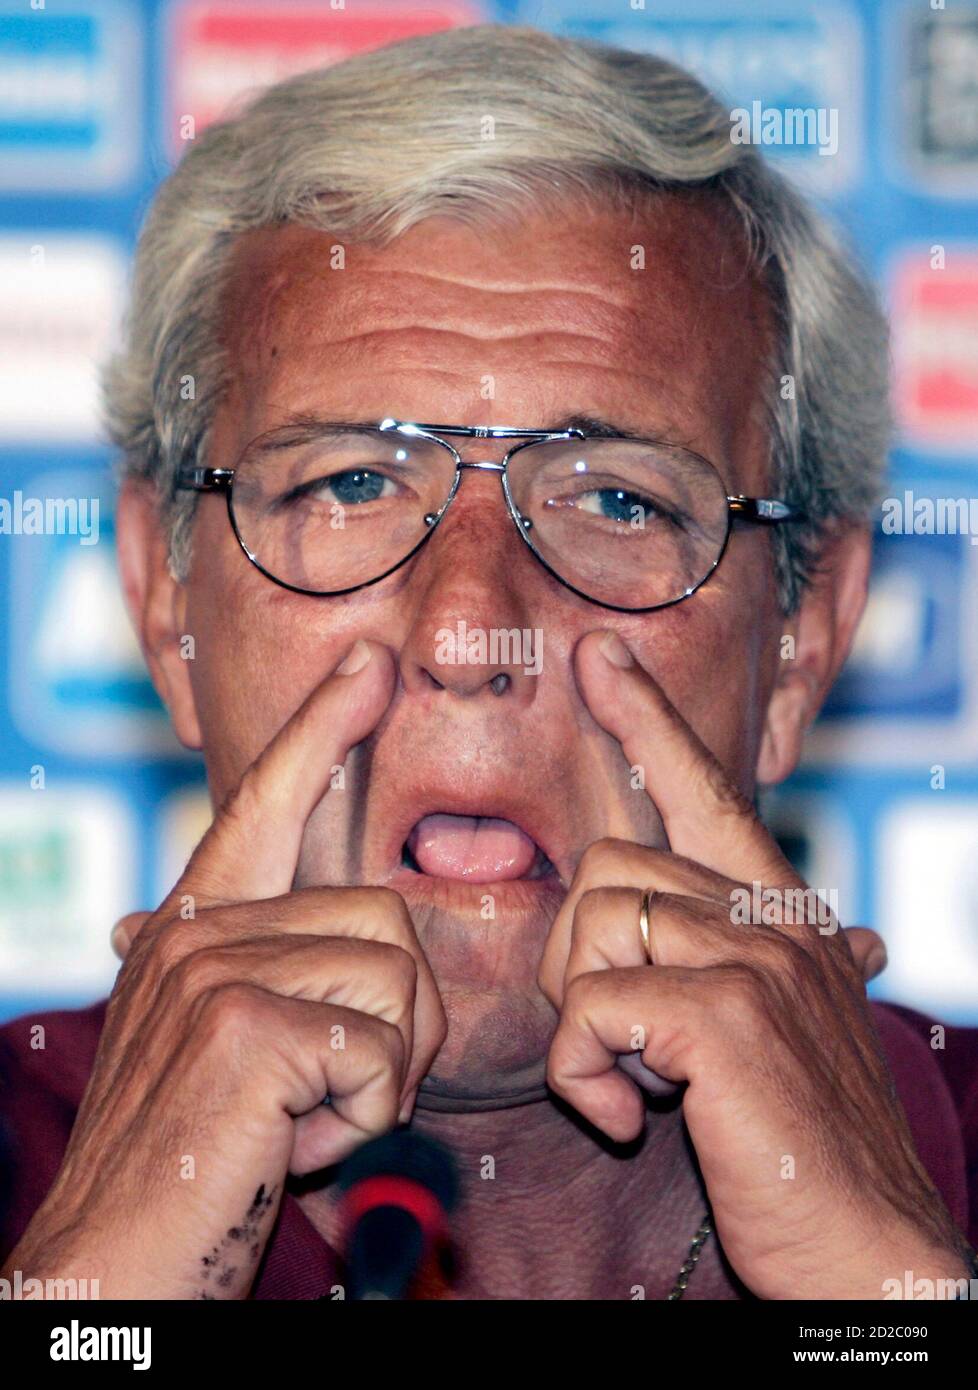 Italy's national soccer team coach Marcello Lippi speaks to reporters at a  training camp in Coverciano, Italy May 27, 2006. Lippi knew his son was  likely to be drawn into the scandal